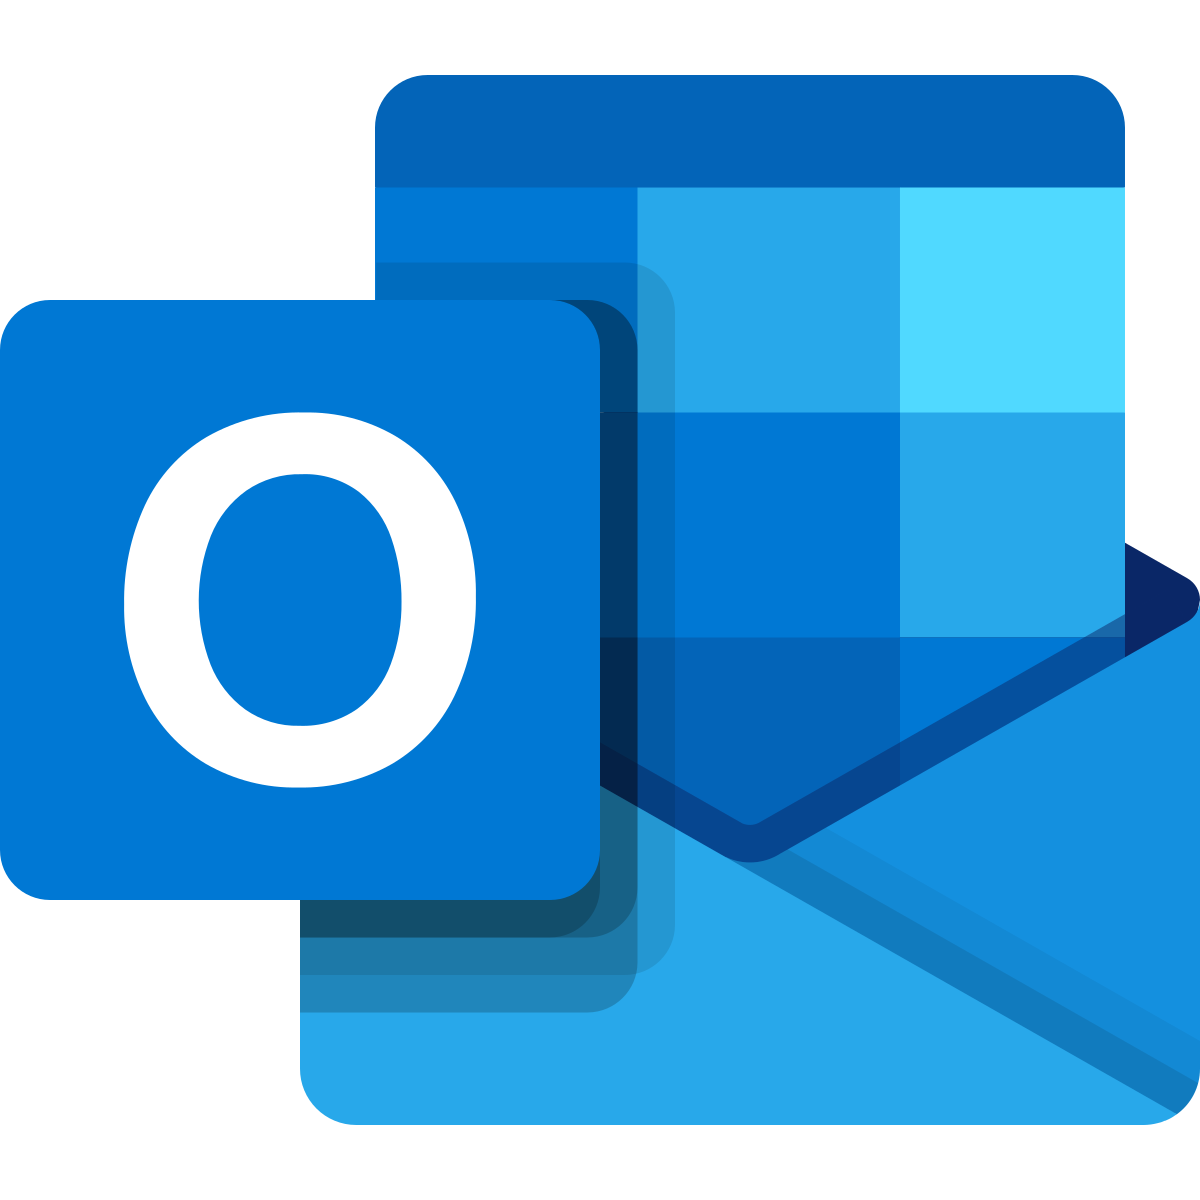 outlook icon